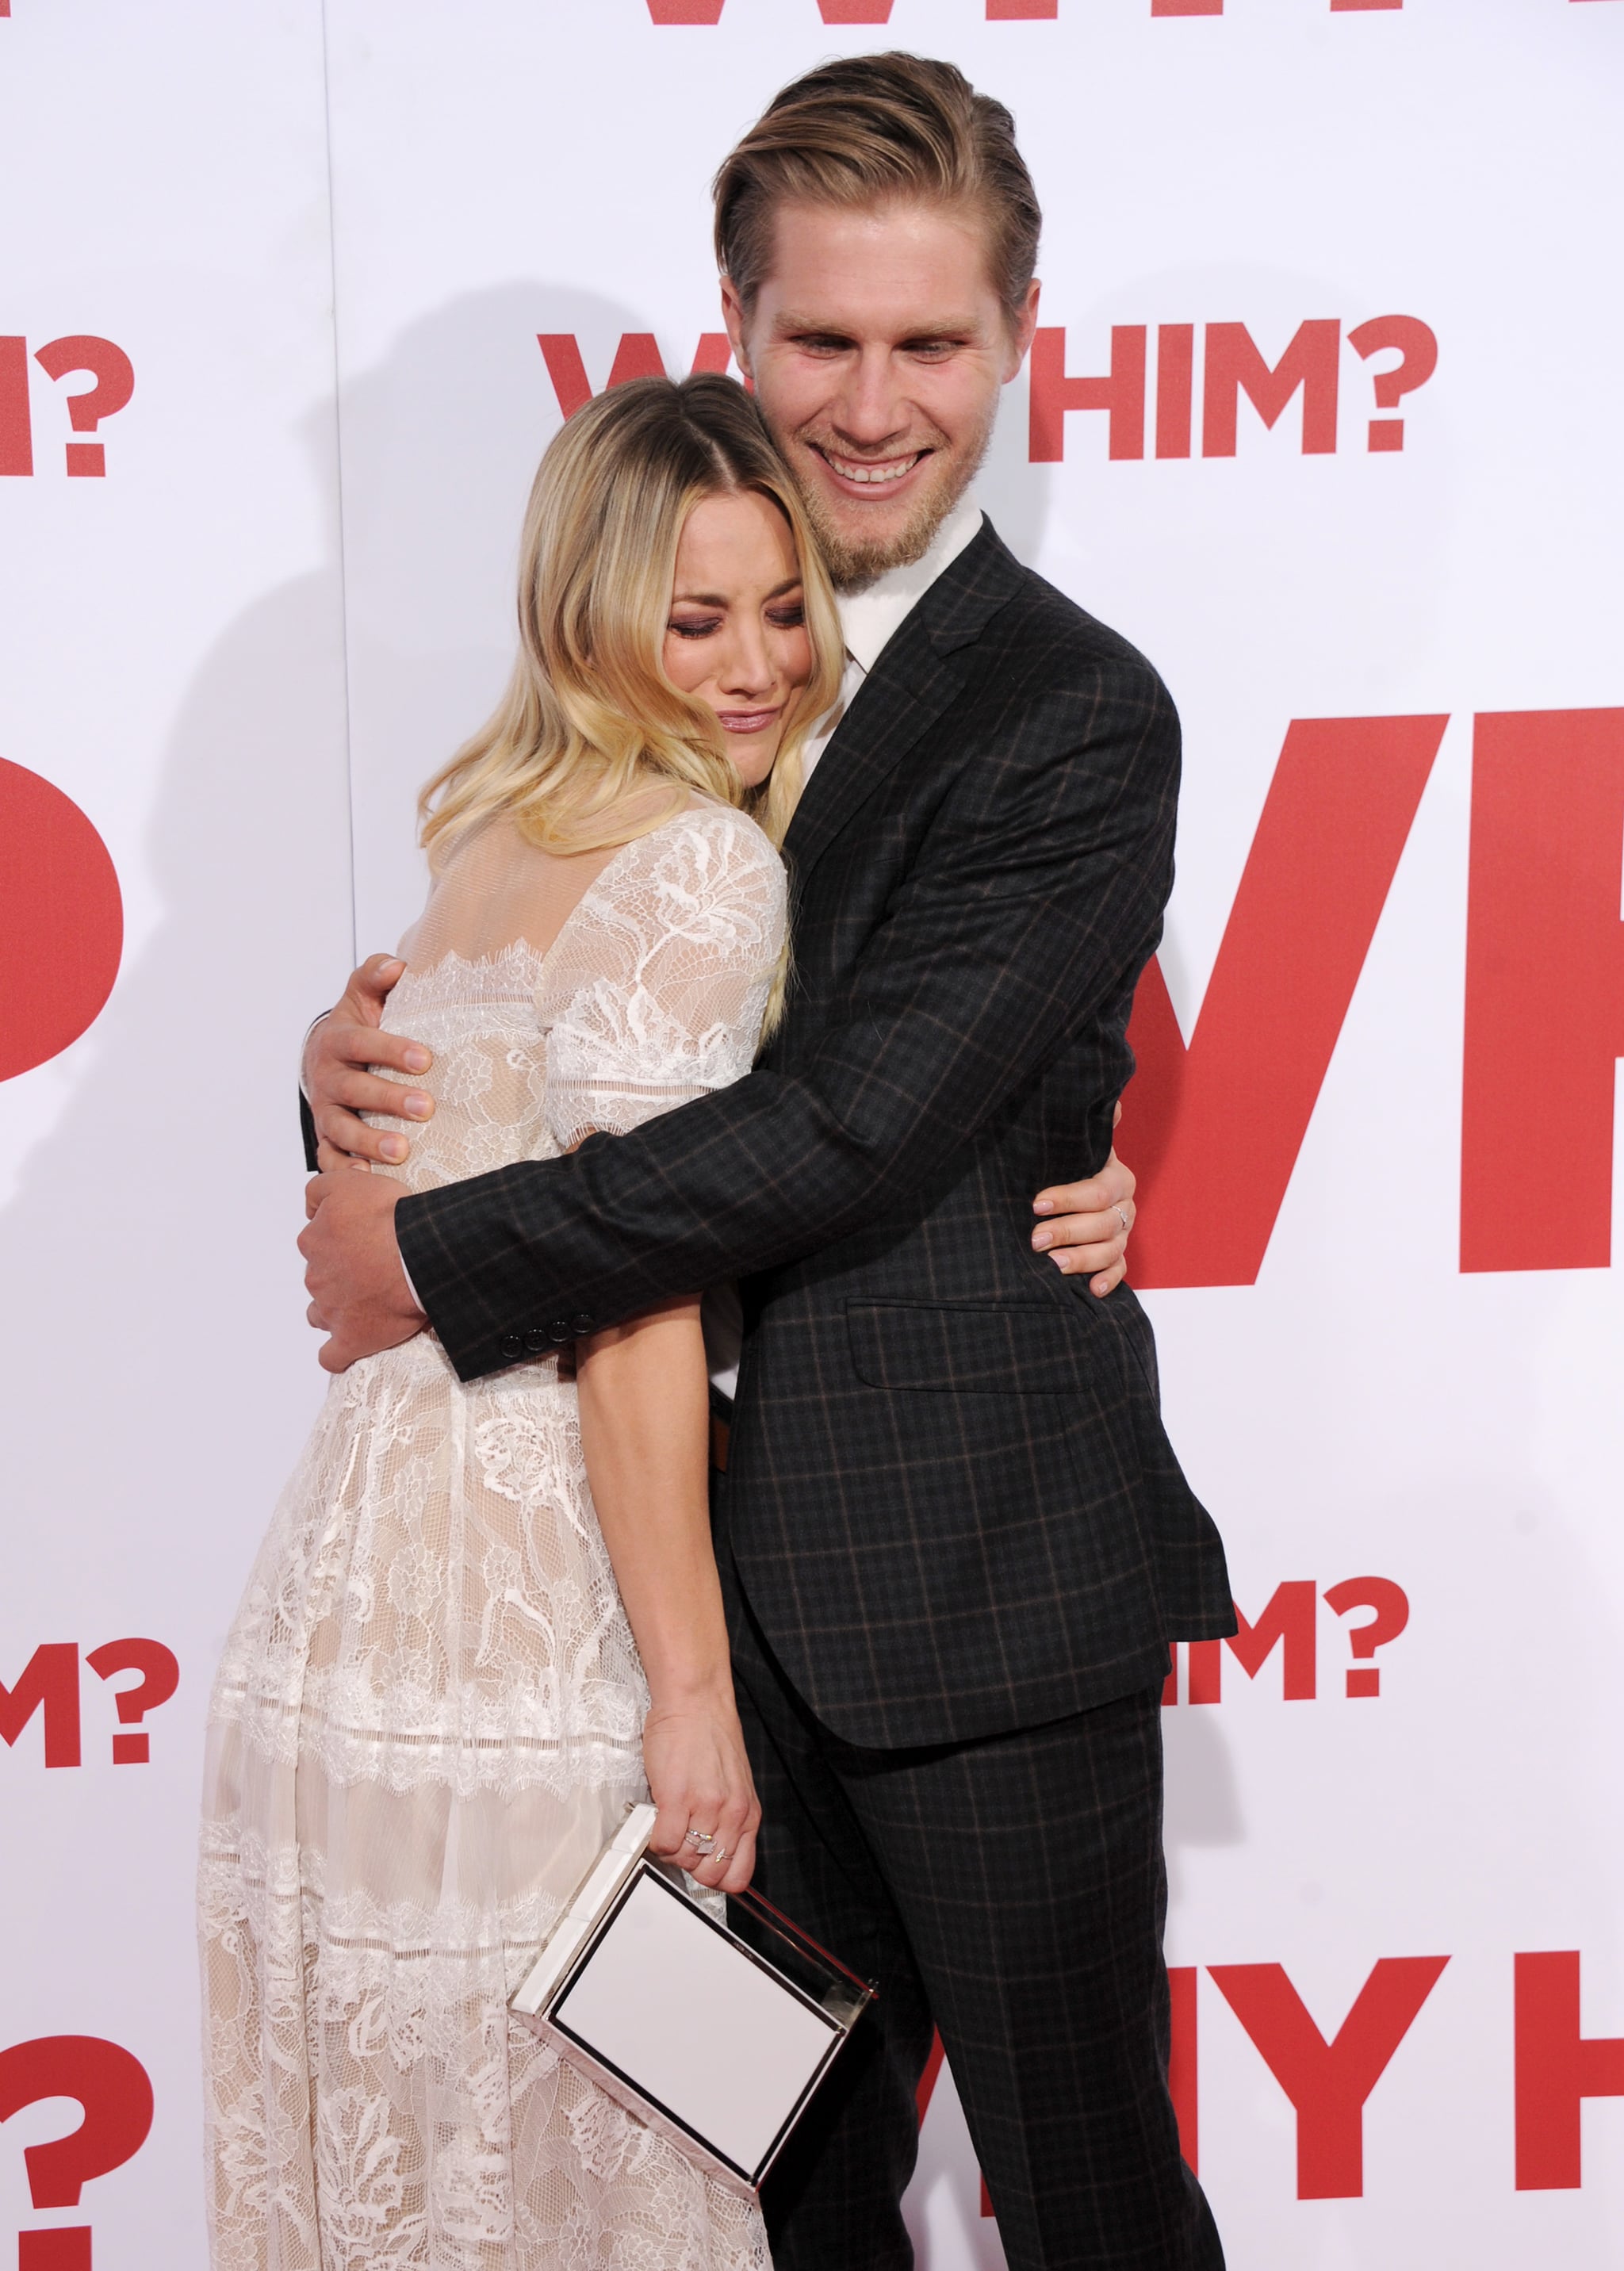 Kaley Cuoco and Karl Cook at Why Him? Premiere 2016 | POPSUGAR Celebrity